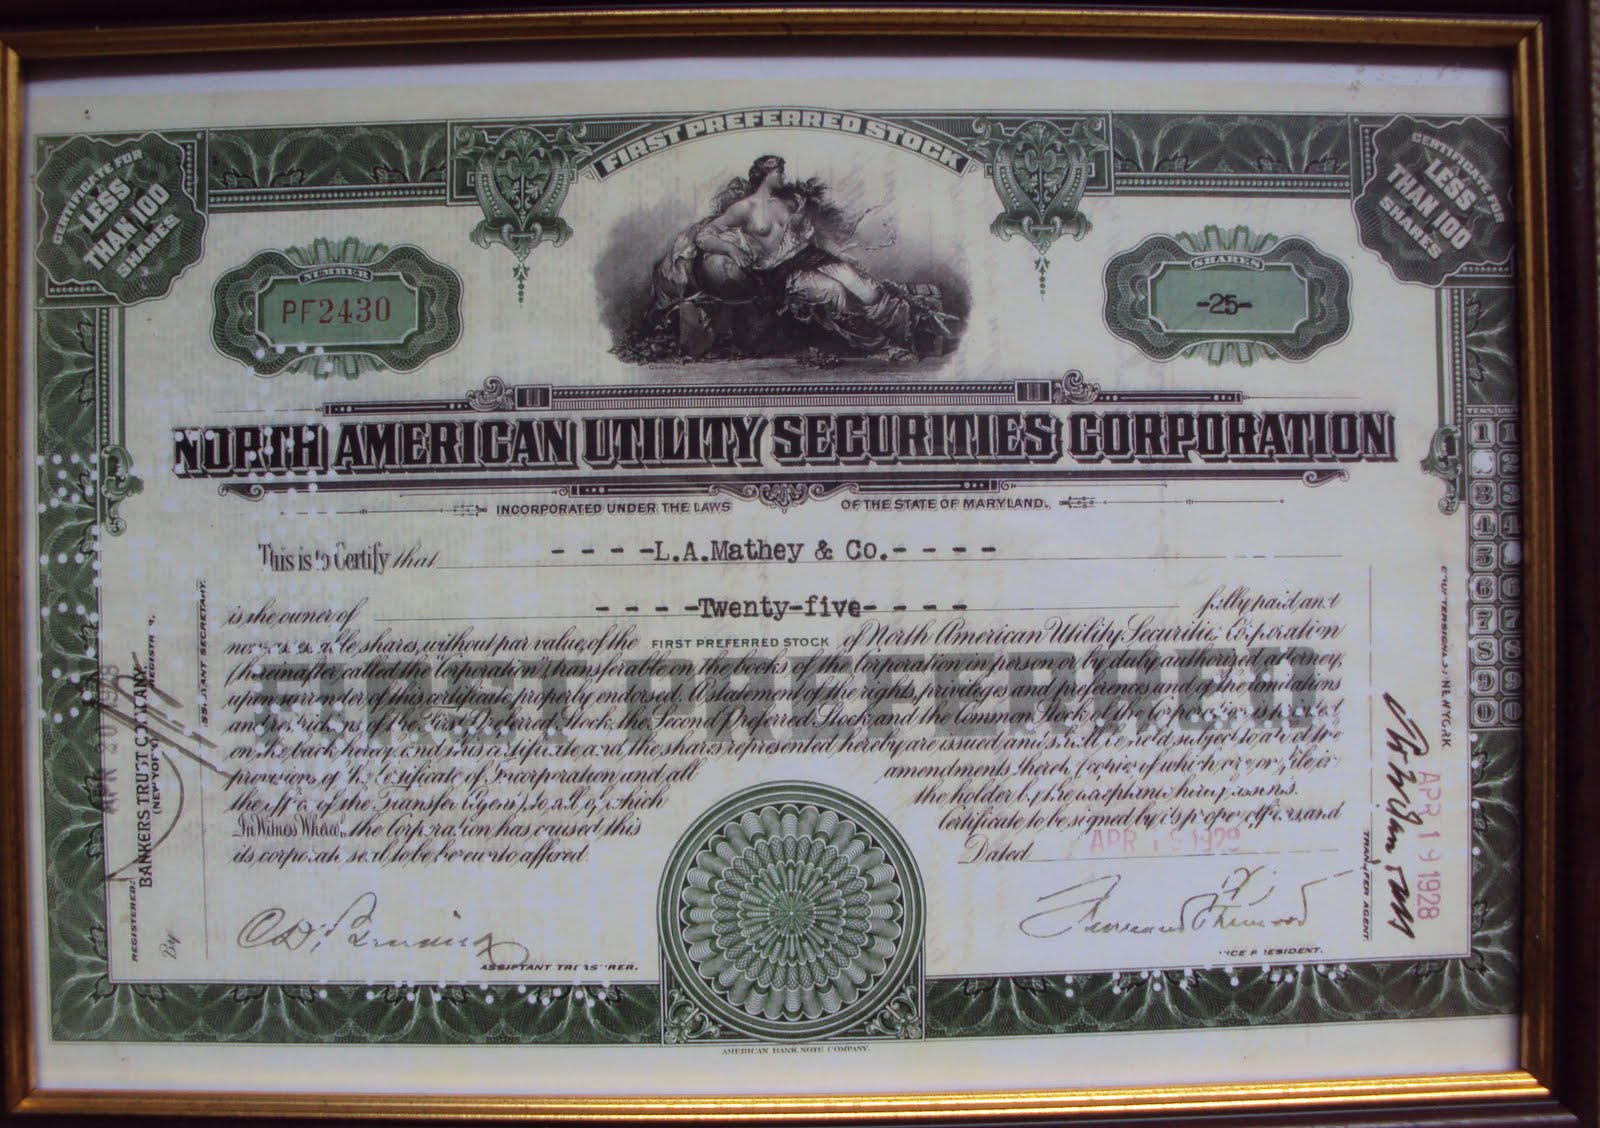 Price Drop Club: Auction 11: Old Share Certificates (Reproductions ...